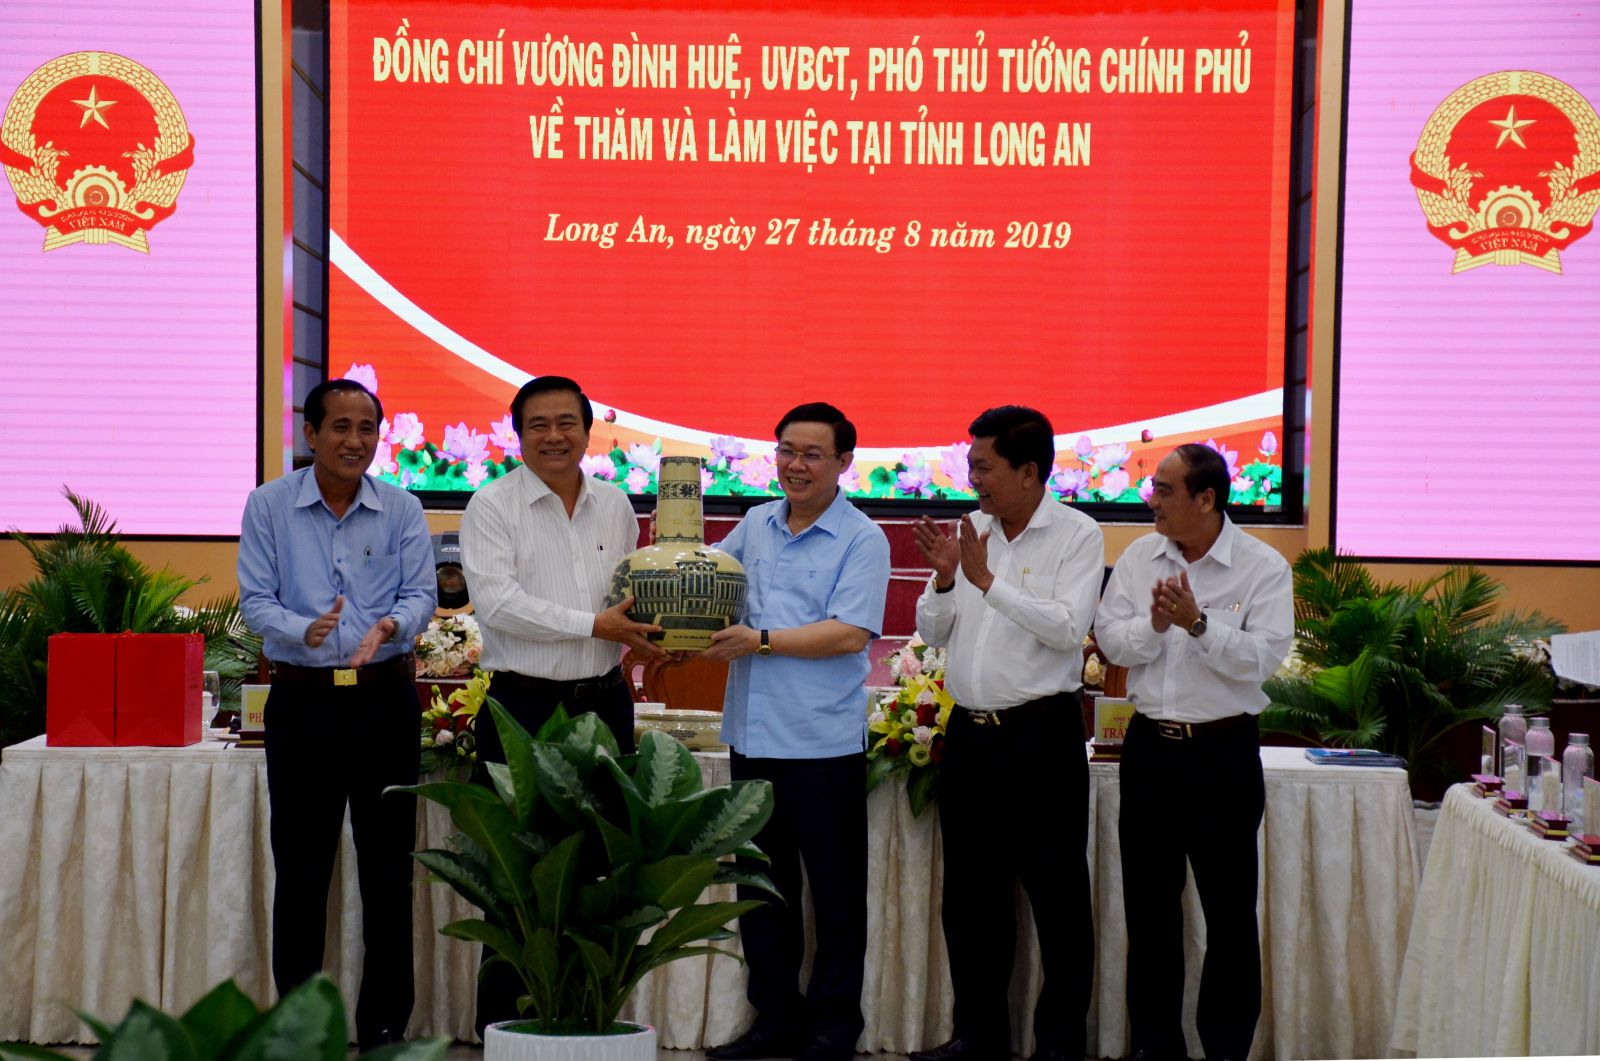 Deputy PM - Vuong Dinh Hue presents a souvenir gift to the leader of Long An province